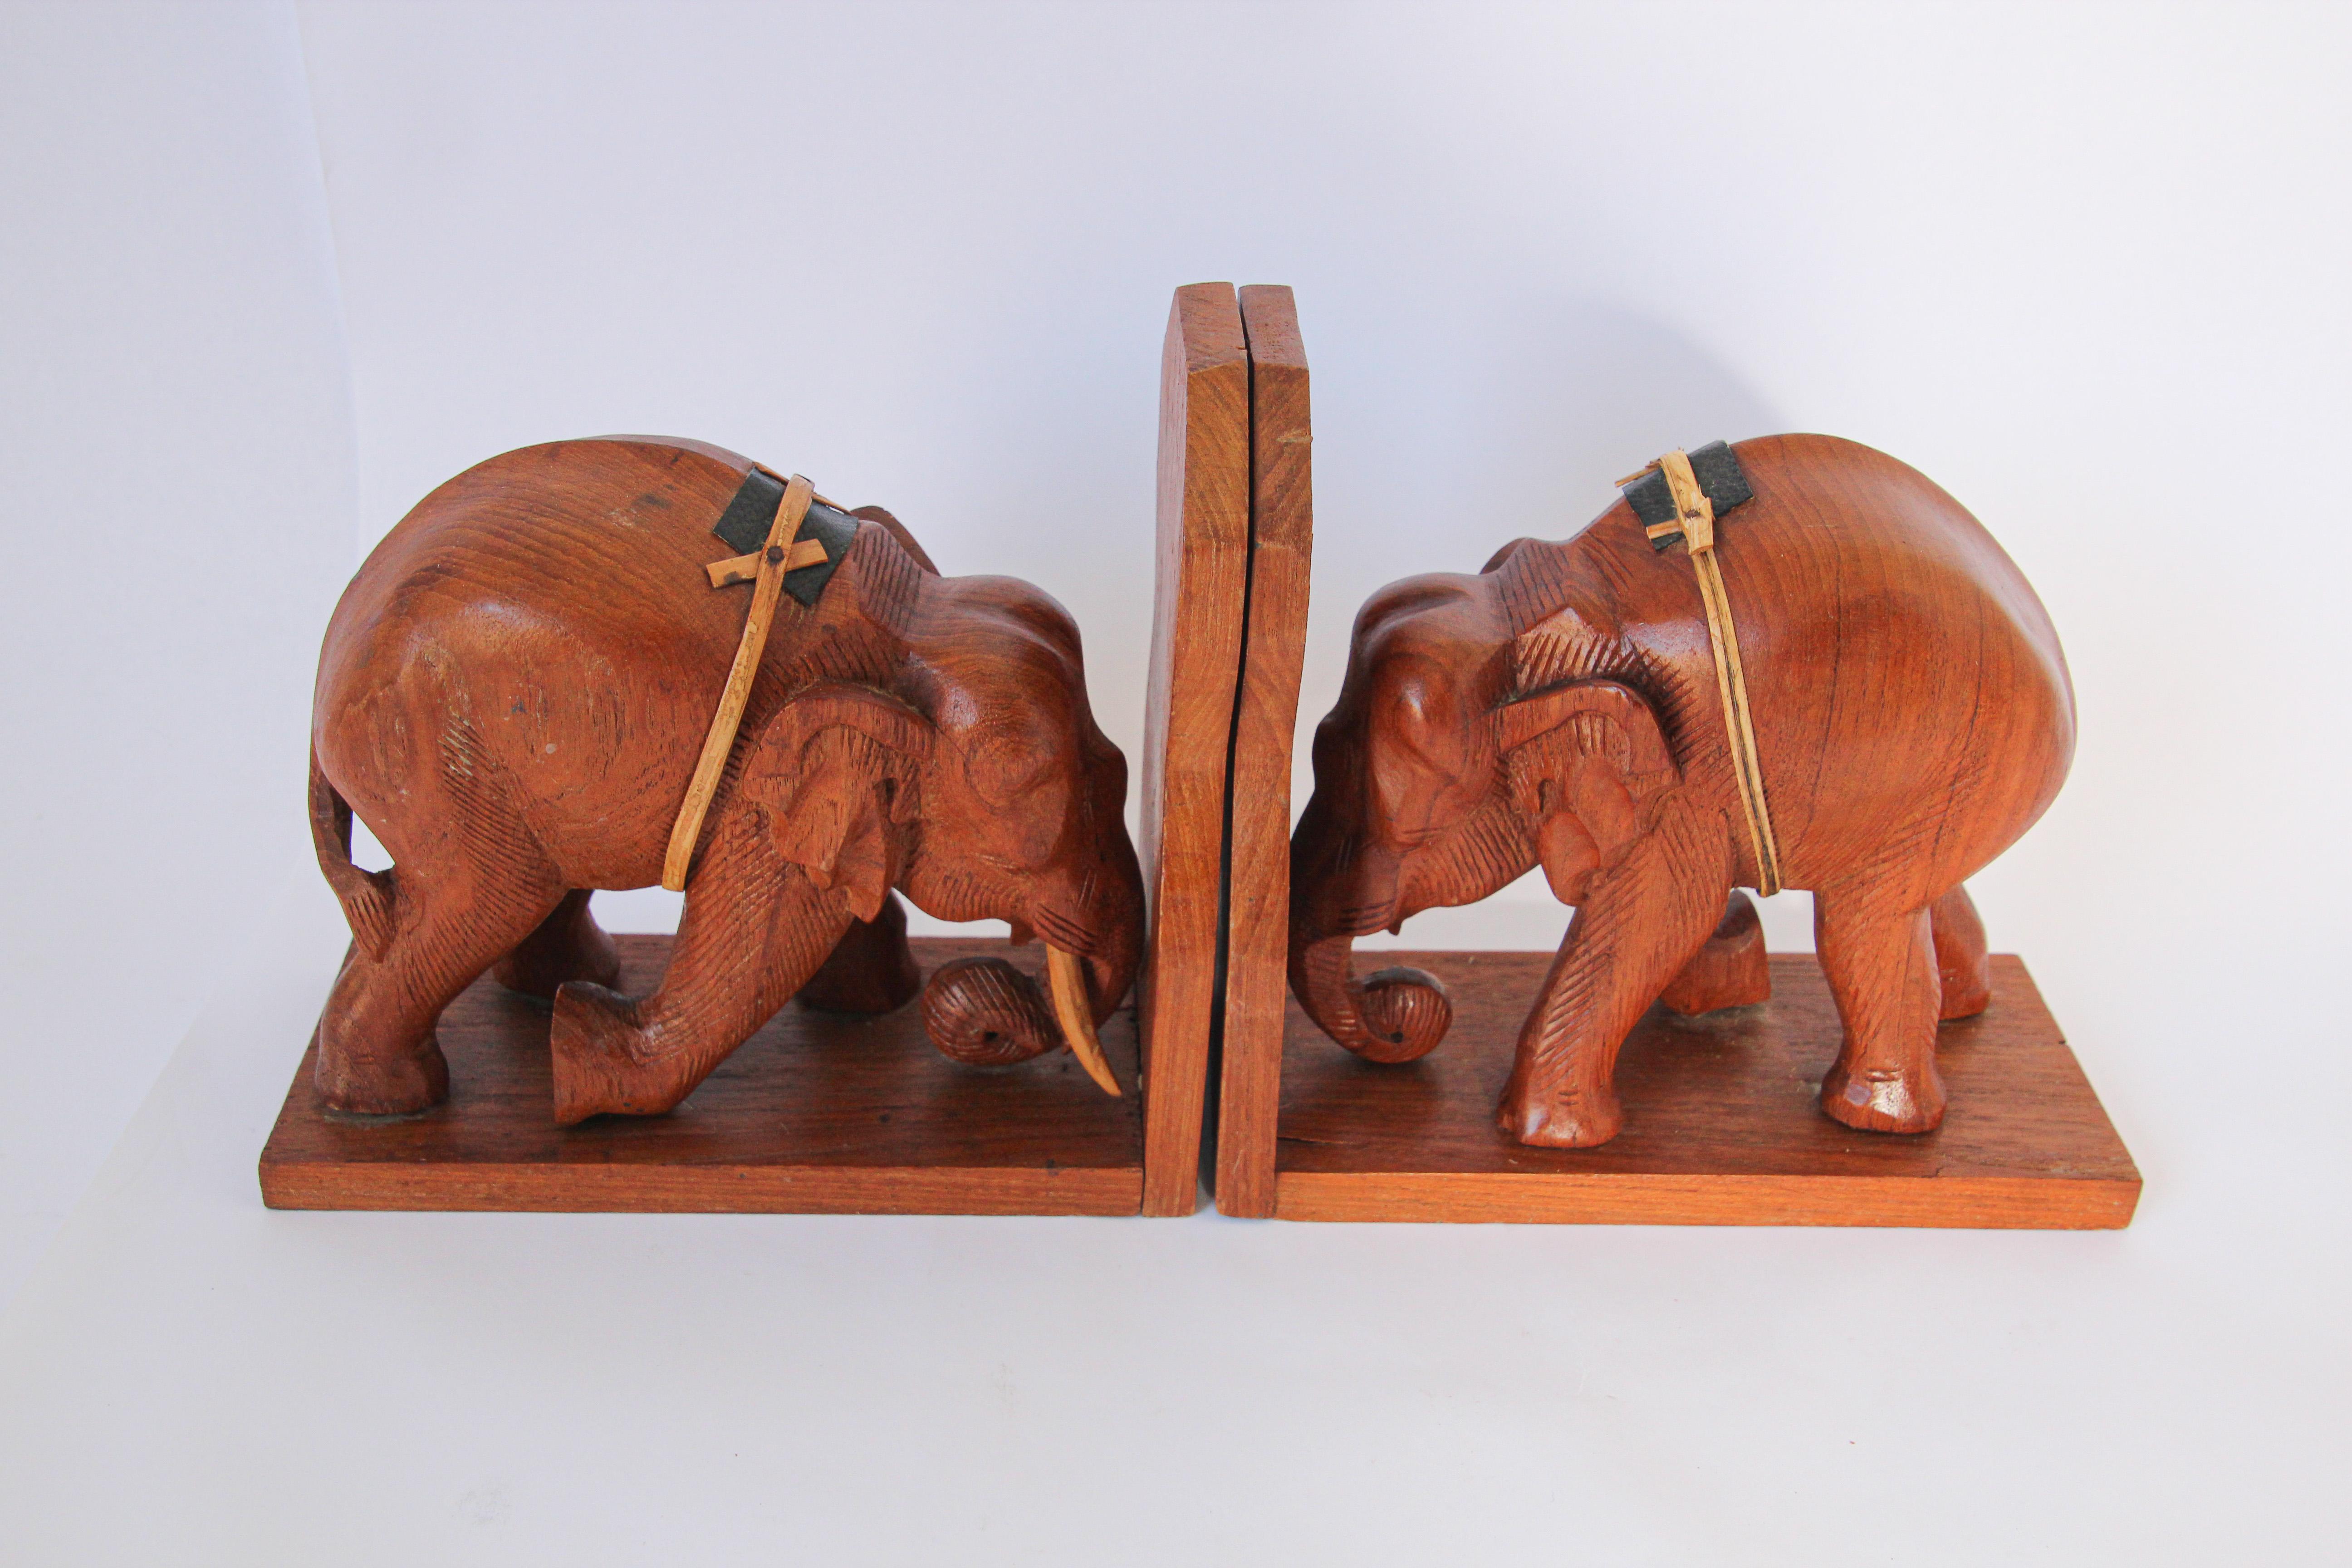 Anglo Raj Hand Carved Wooden Elephant Bookends, circa 1950